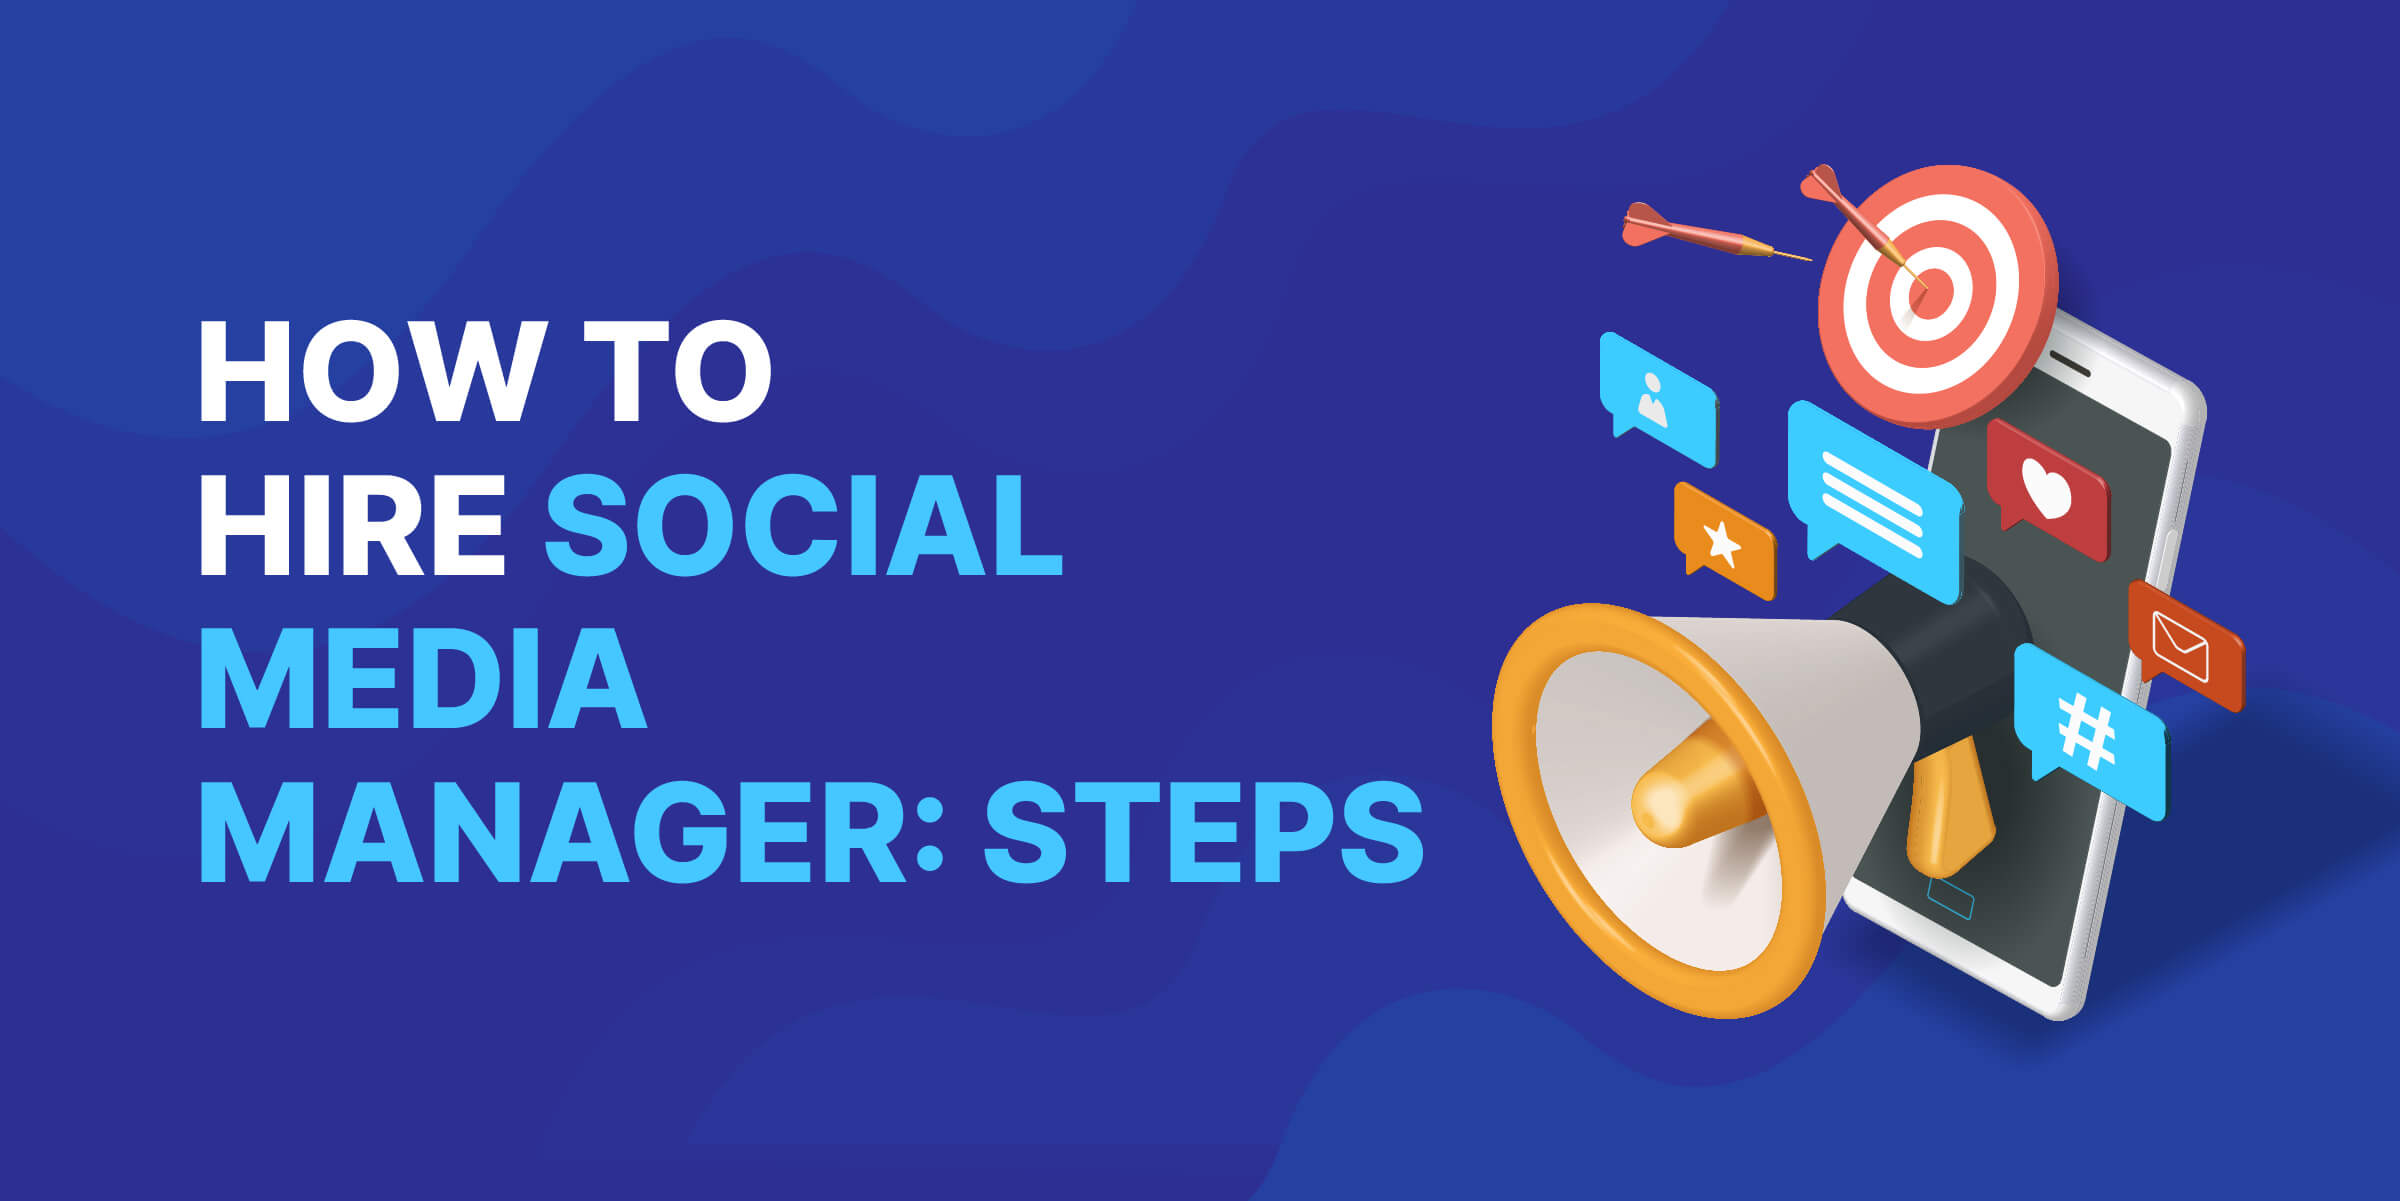 How to Hire Social Media Manager Steps